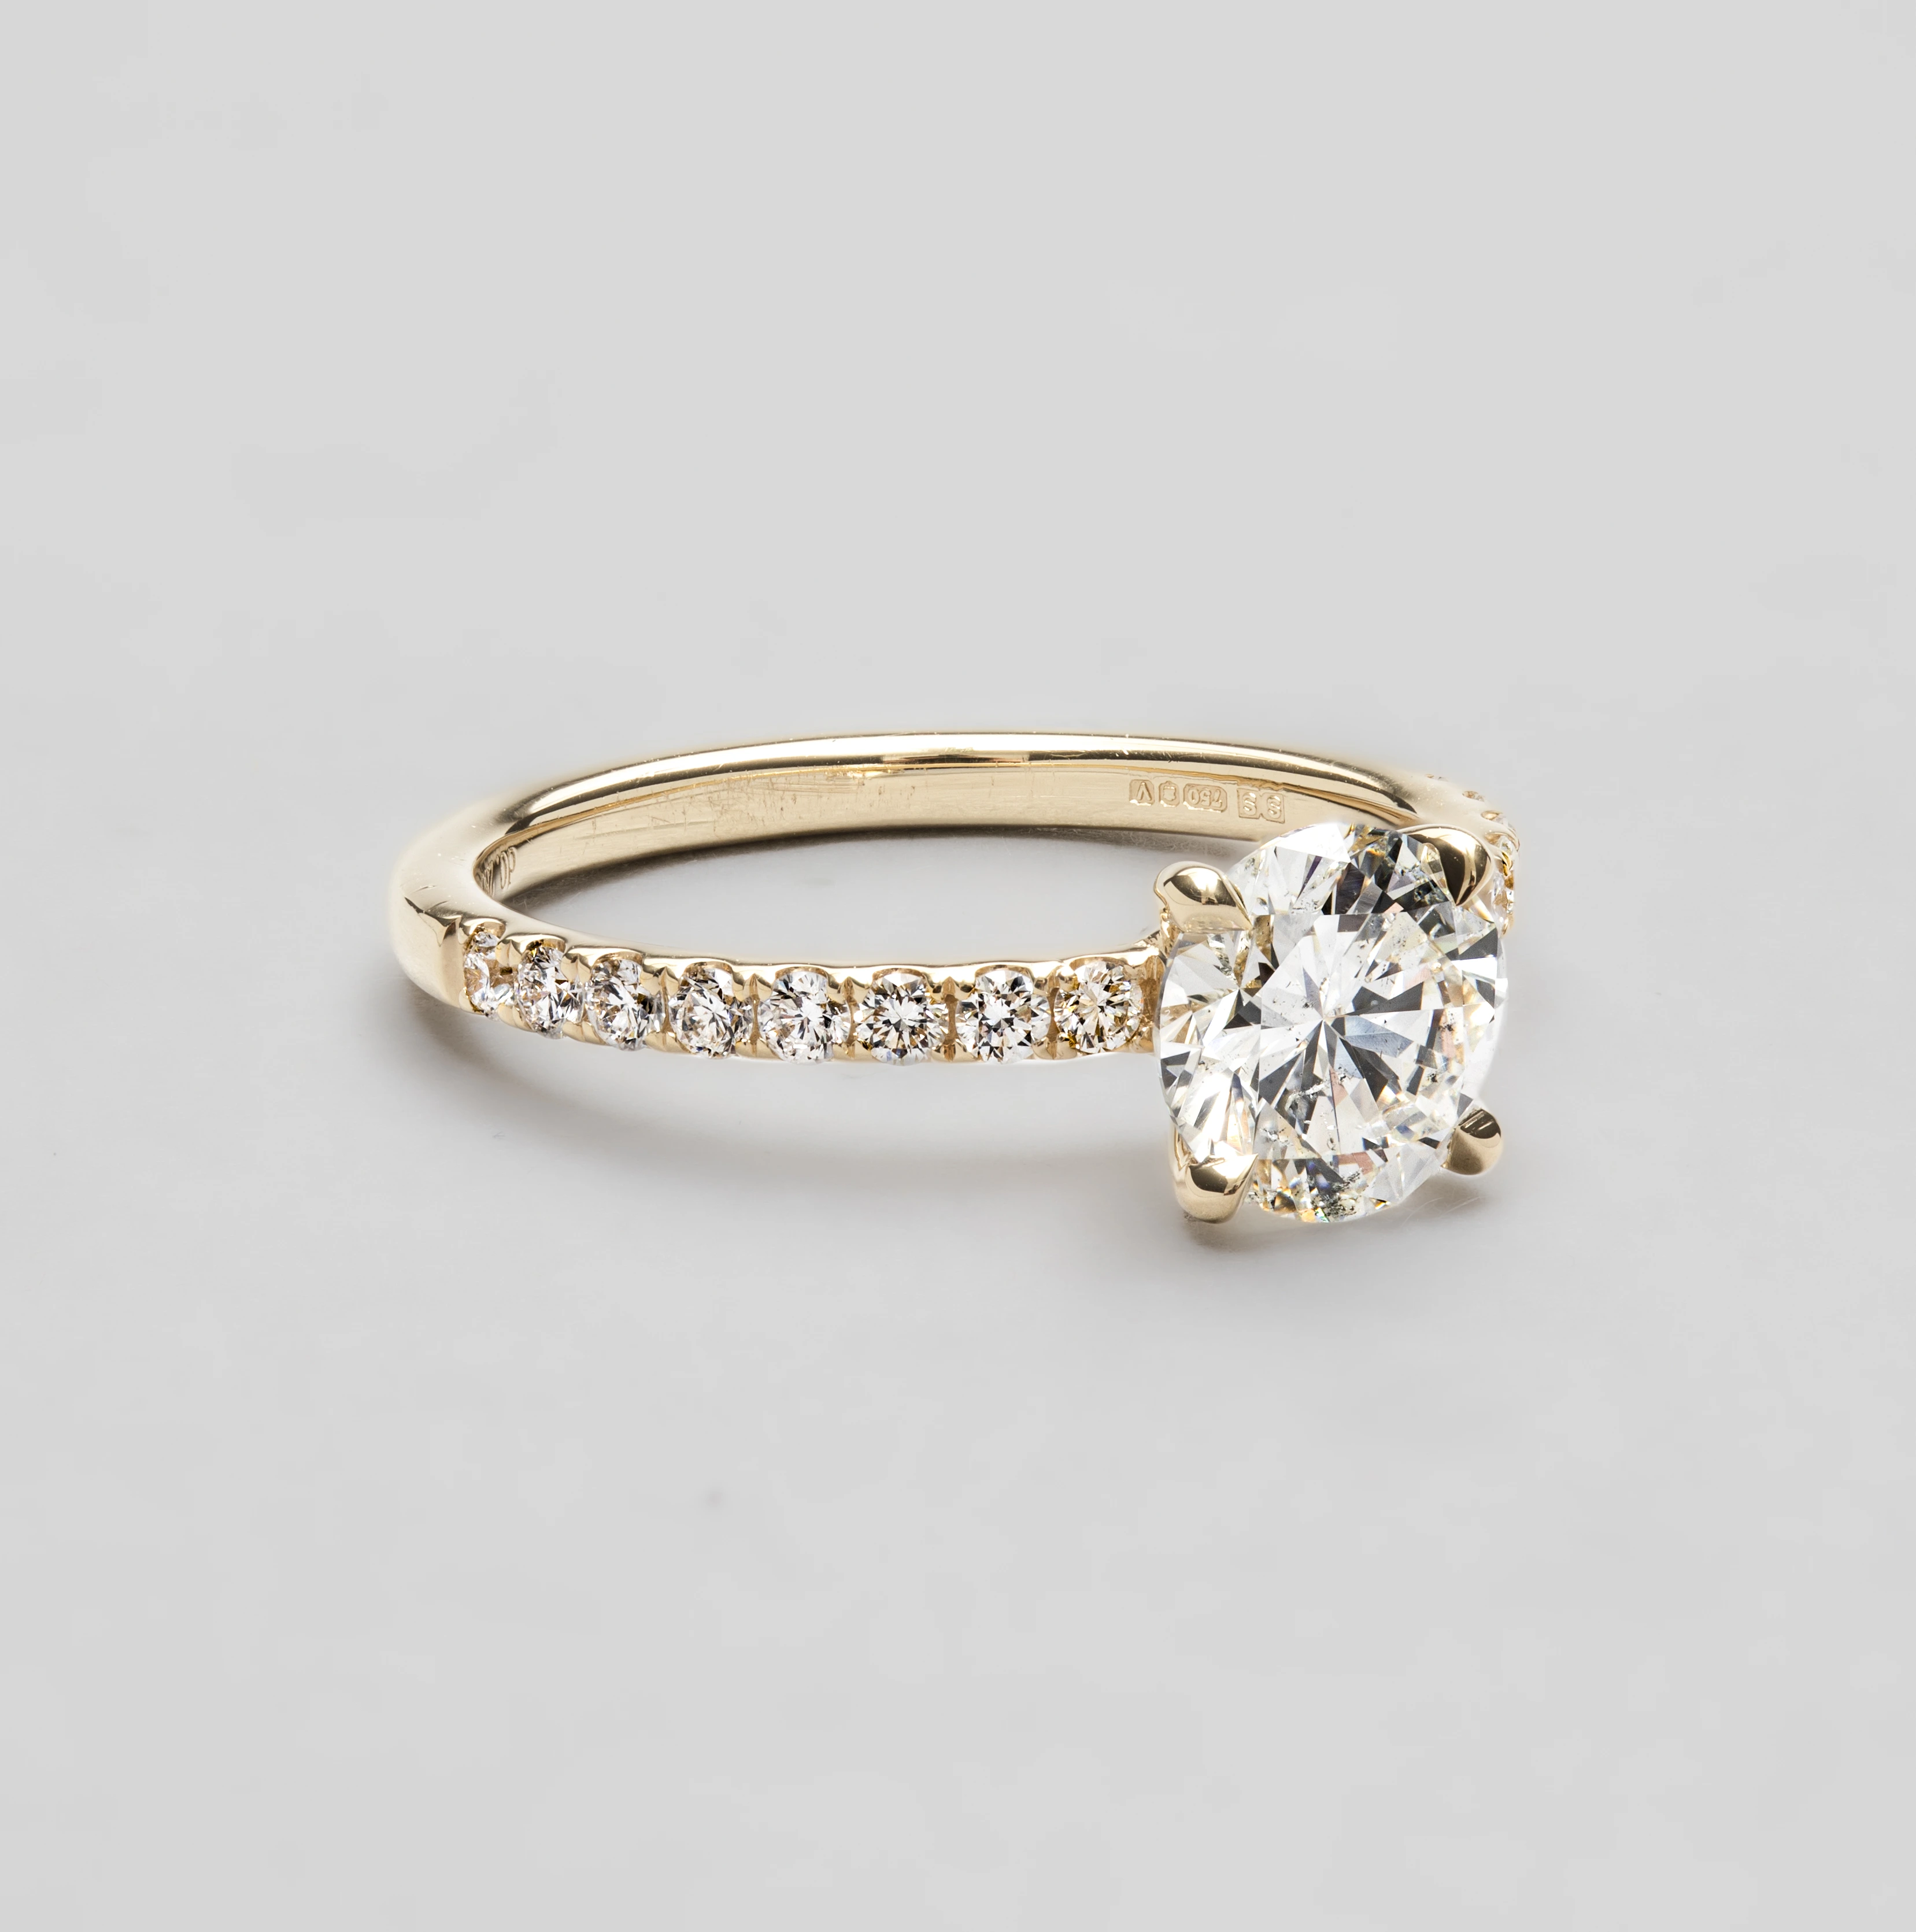 [PDR0020] 18ct Yellow Gold Simplicity Cutdown Round Brilliant Diamond Engagement Ring - GIA 2221572370 1.25CT G/I1